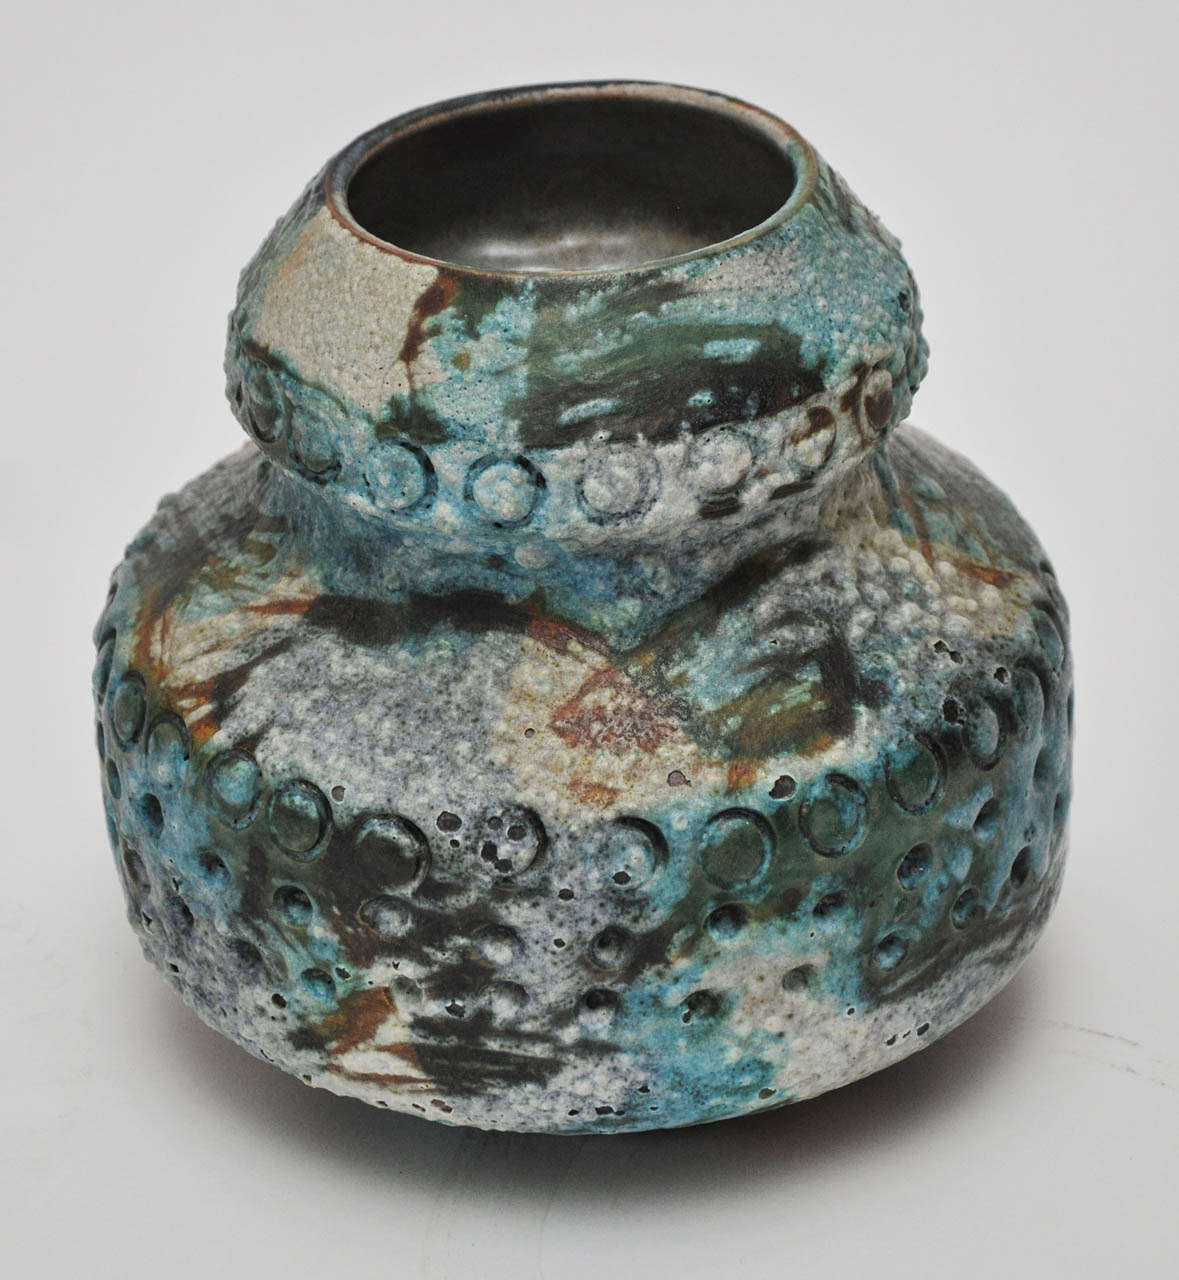 Sea Garden Series Vase by Alvino Bagni for Raymor In Excellent Condition For Sale In Northfield, IL